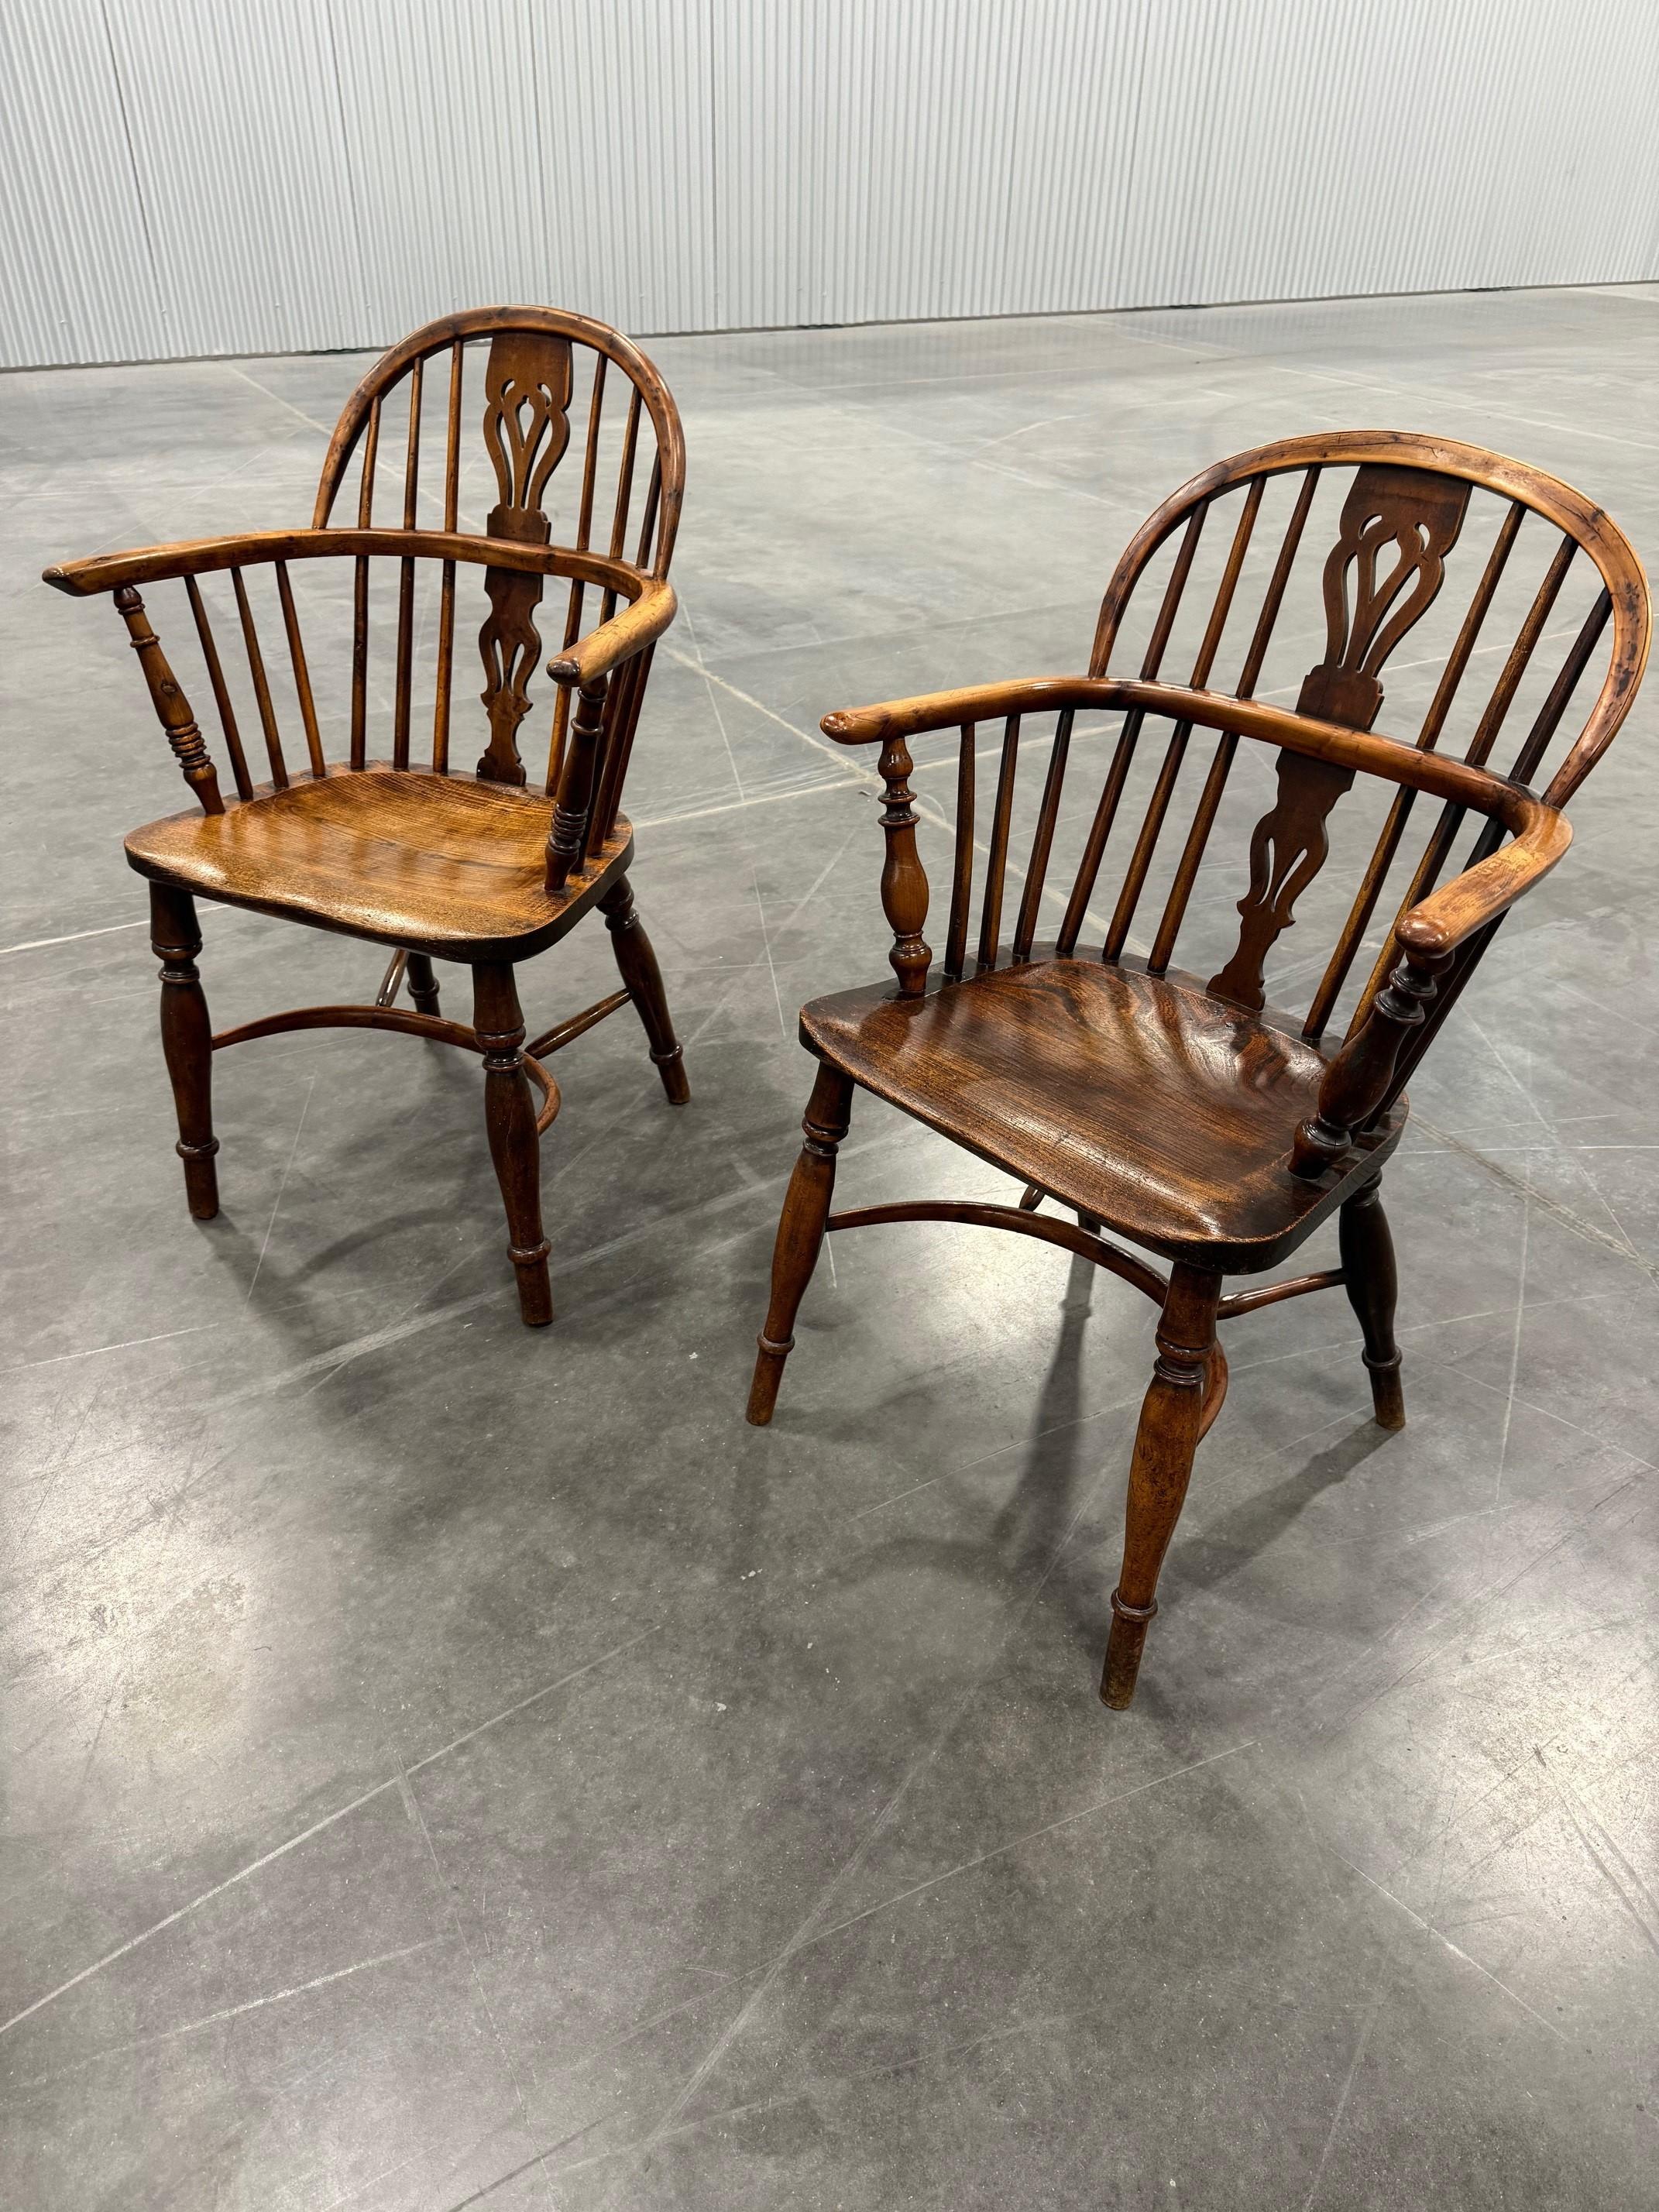 Matched Set of Two Early Low back Yew Wood Windsor Chairs For Sale 8